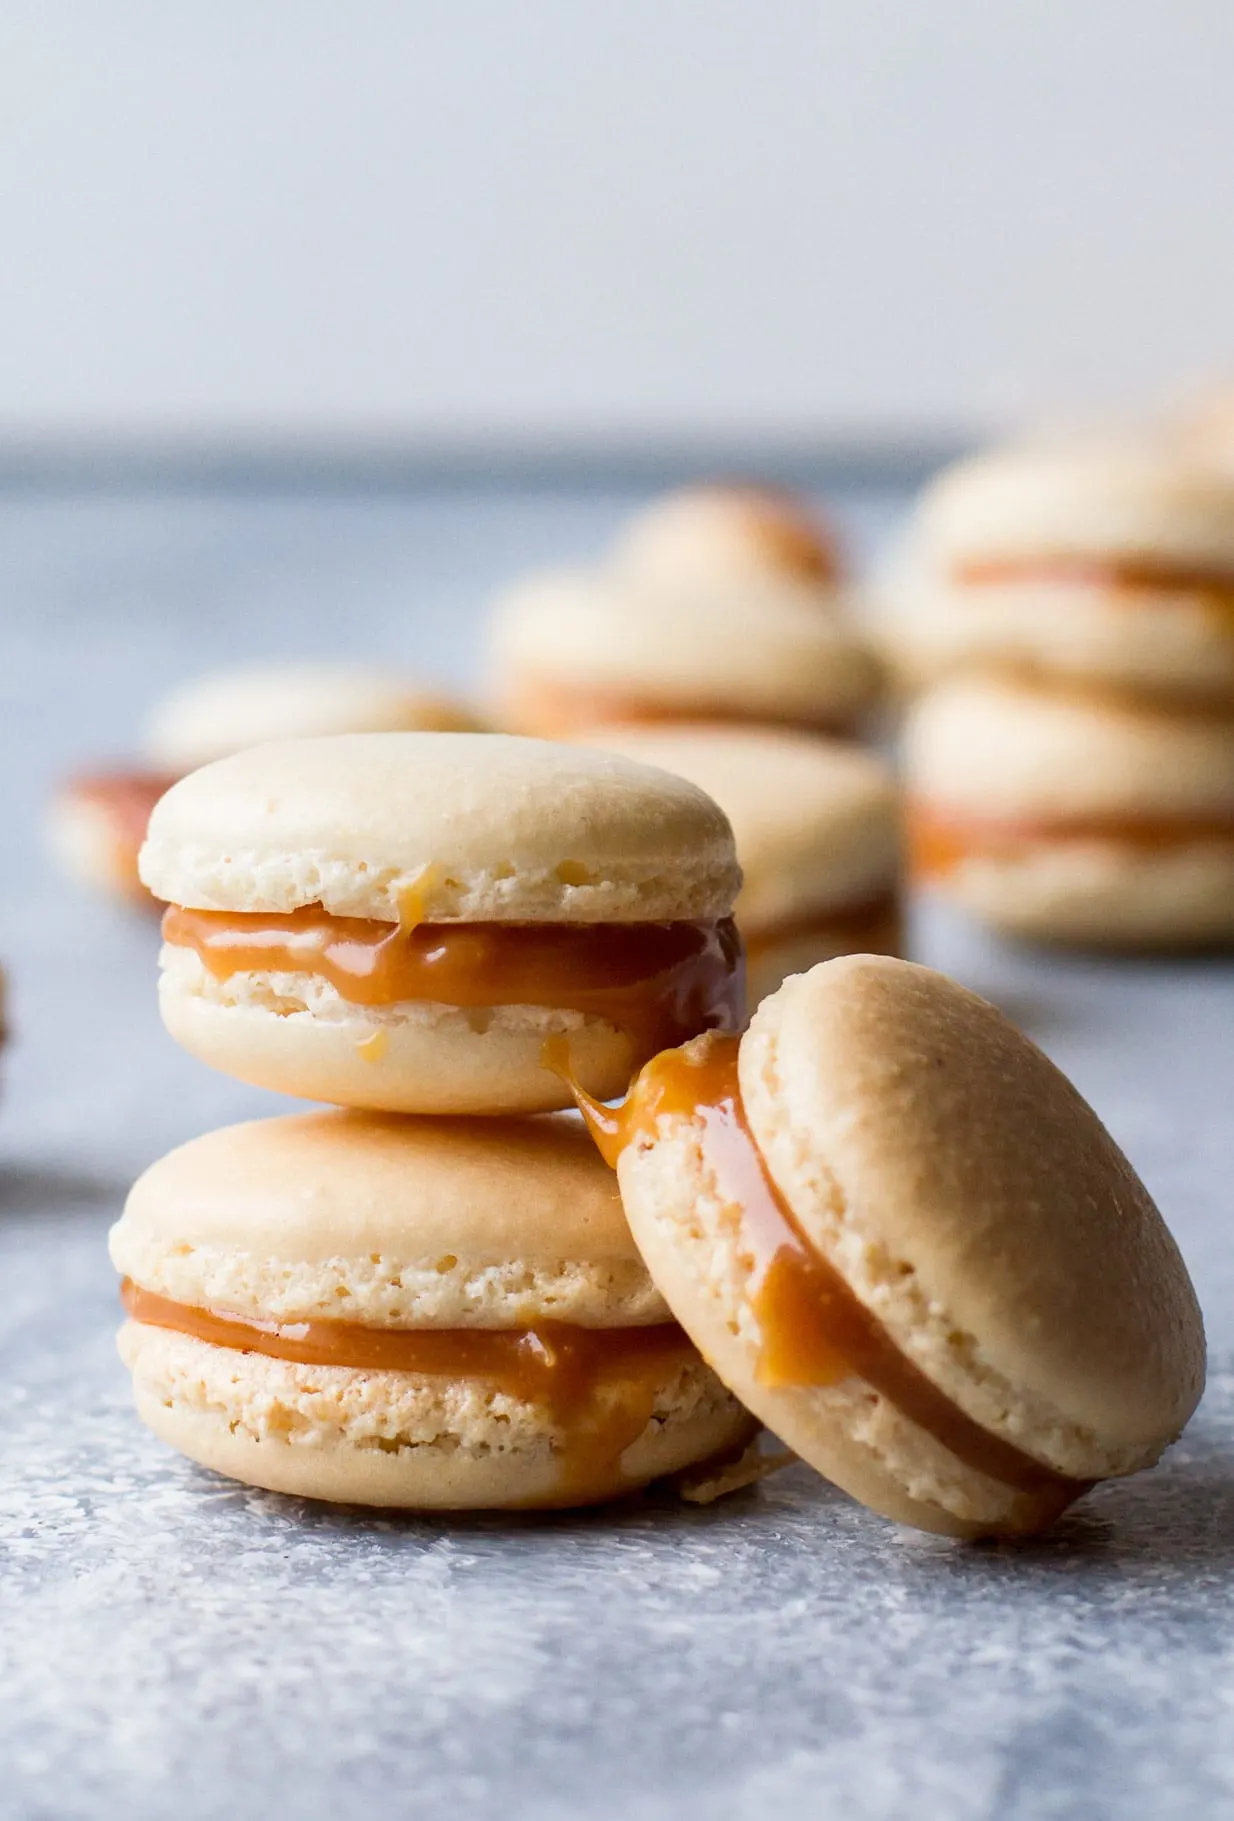 Salted Caramel Macarons with Homemade Caramel stacked with blurred macarons in the background.